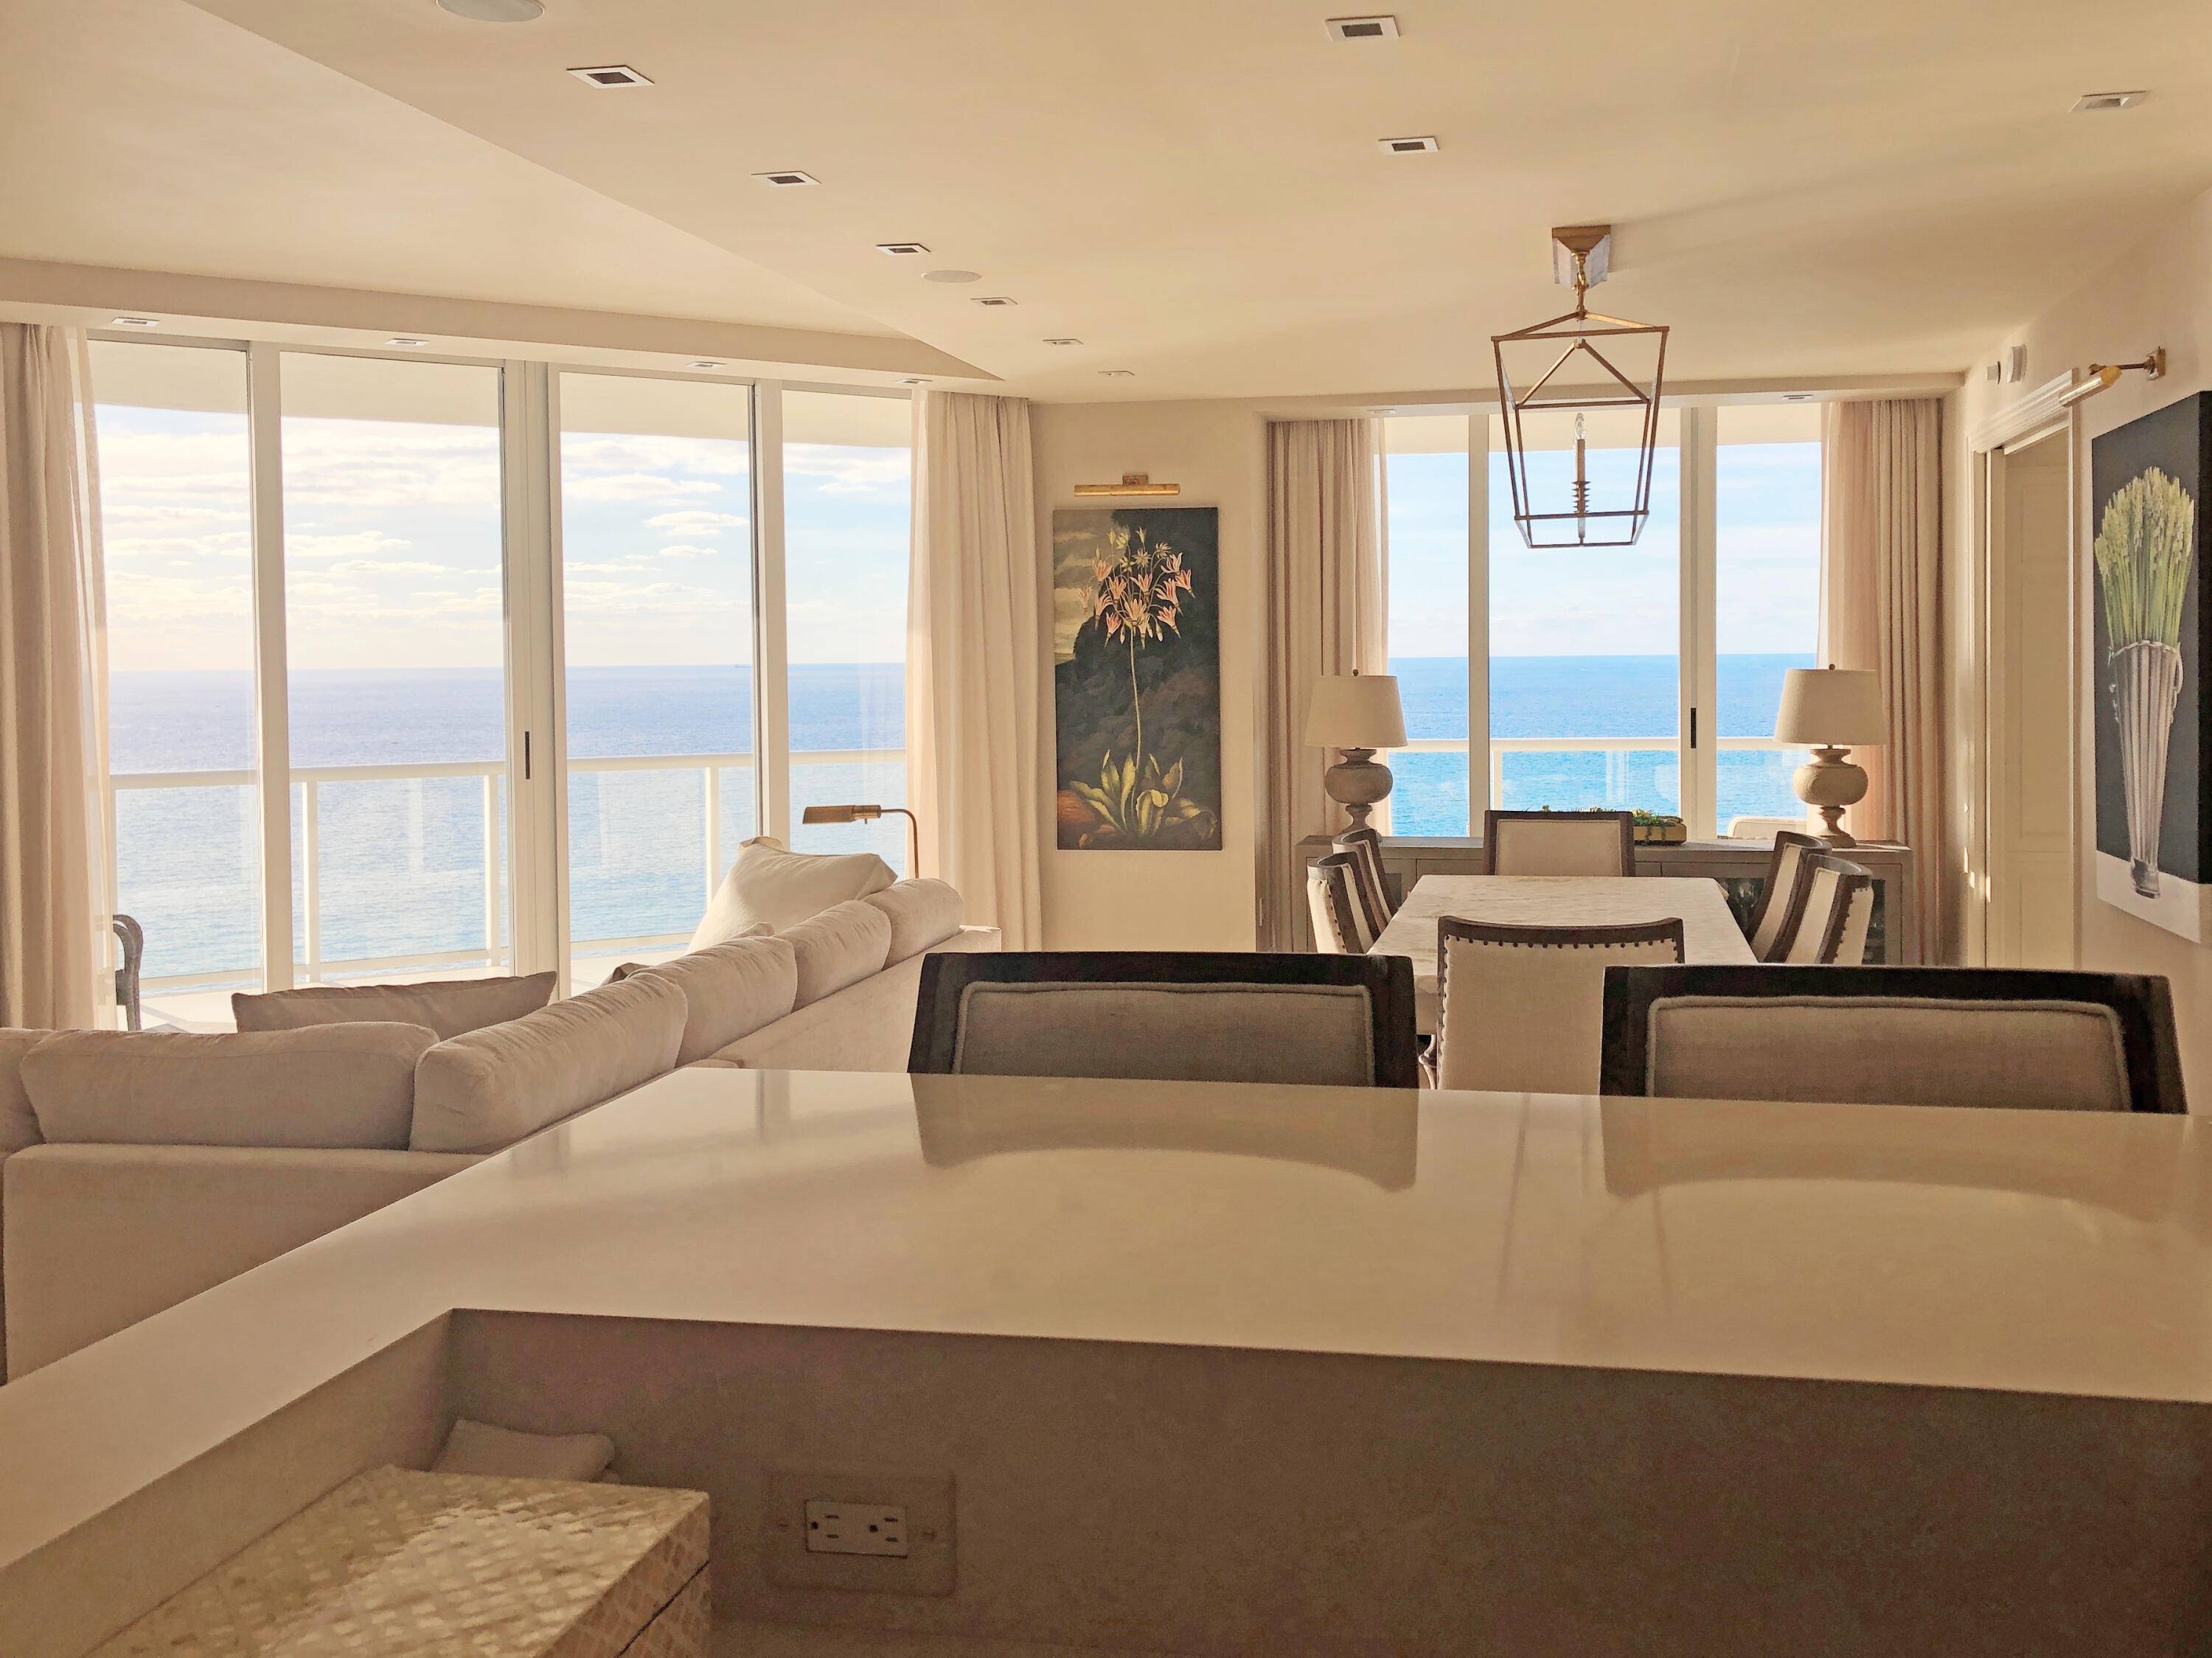 Enjoy island life this summer with these breathtaking views from every room of this 23rd floor exclusive residence.